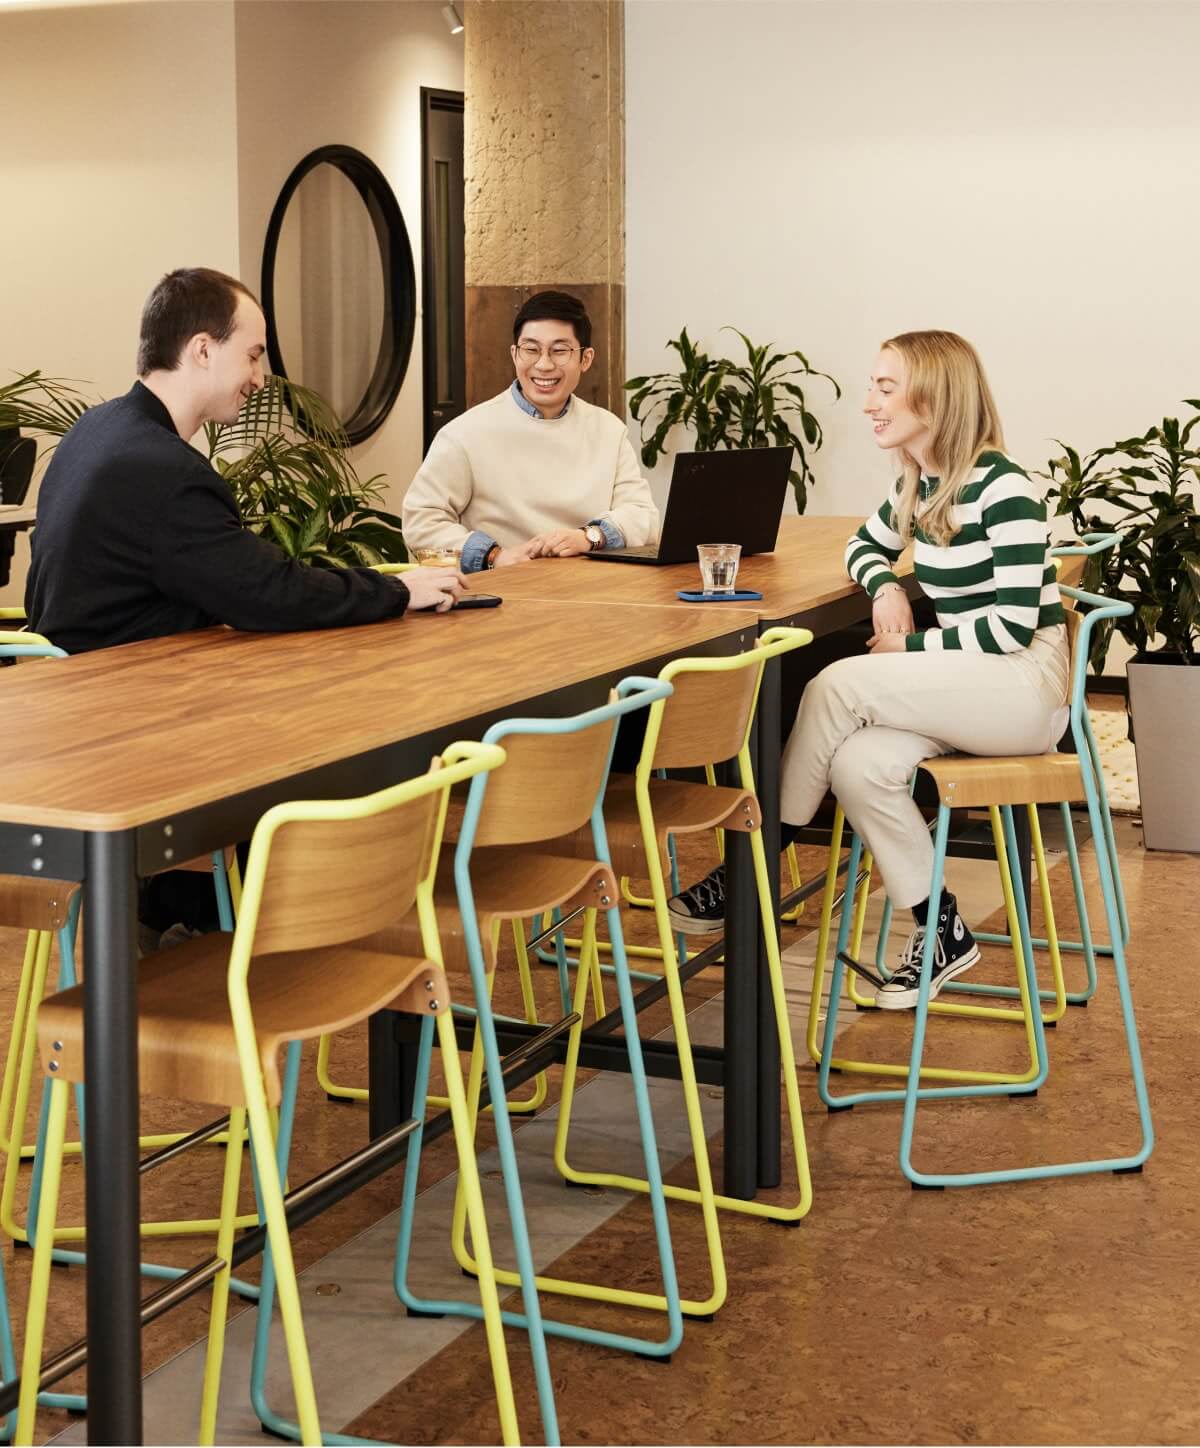 Three Workleap employees collaborating in a modern and casual setting, fostering teamwork and innovation